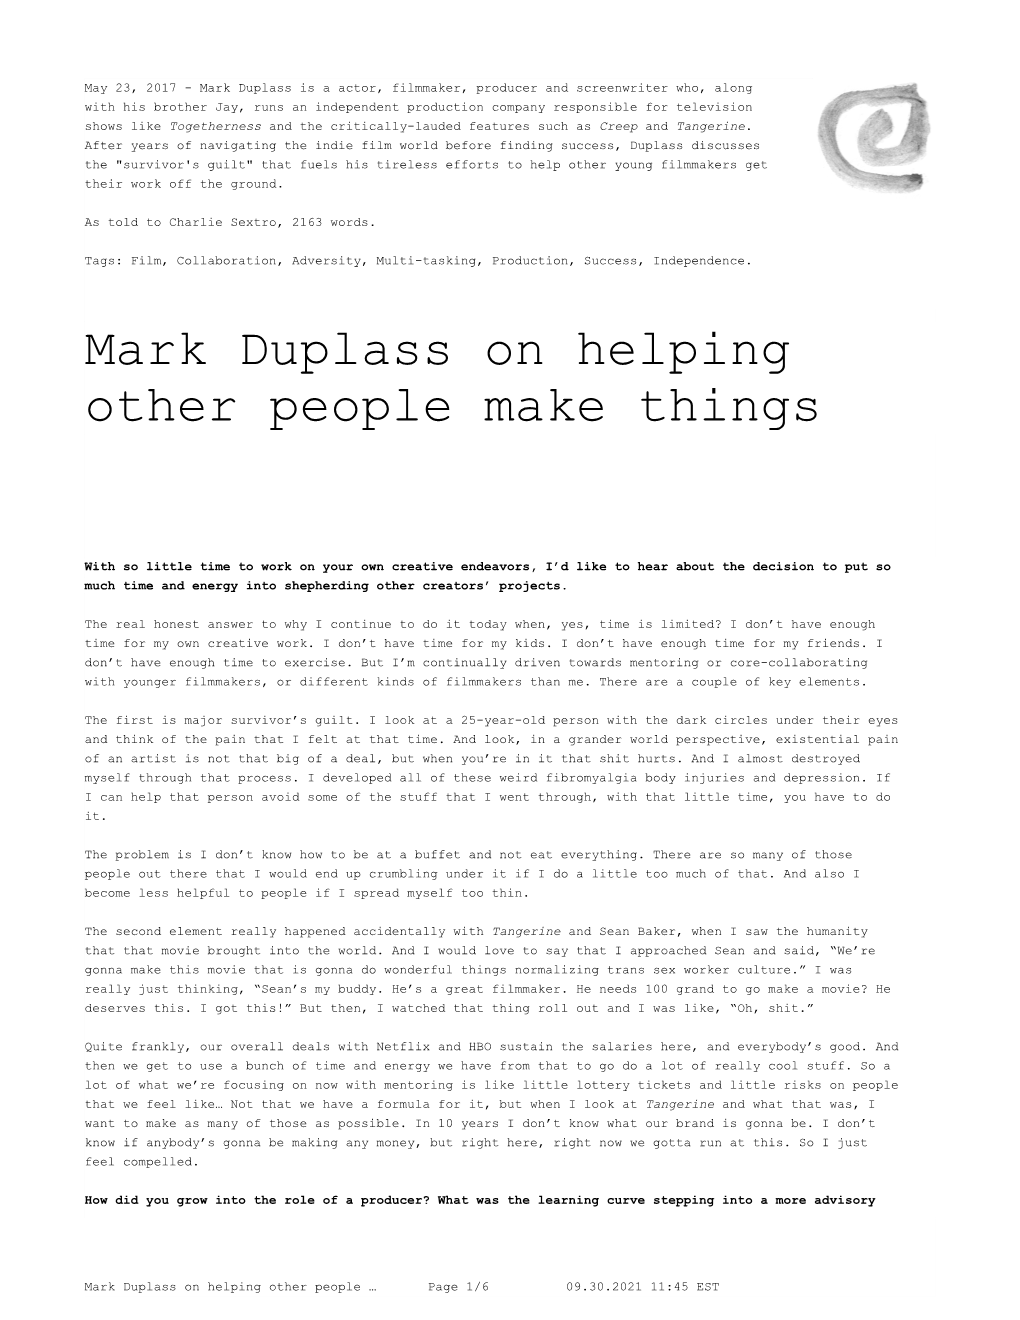 Mark Duplass on Helping Other People Make Things